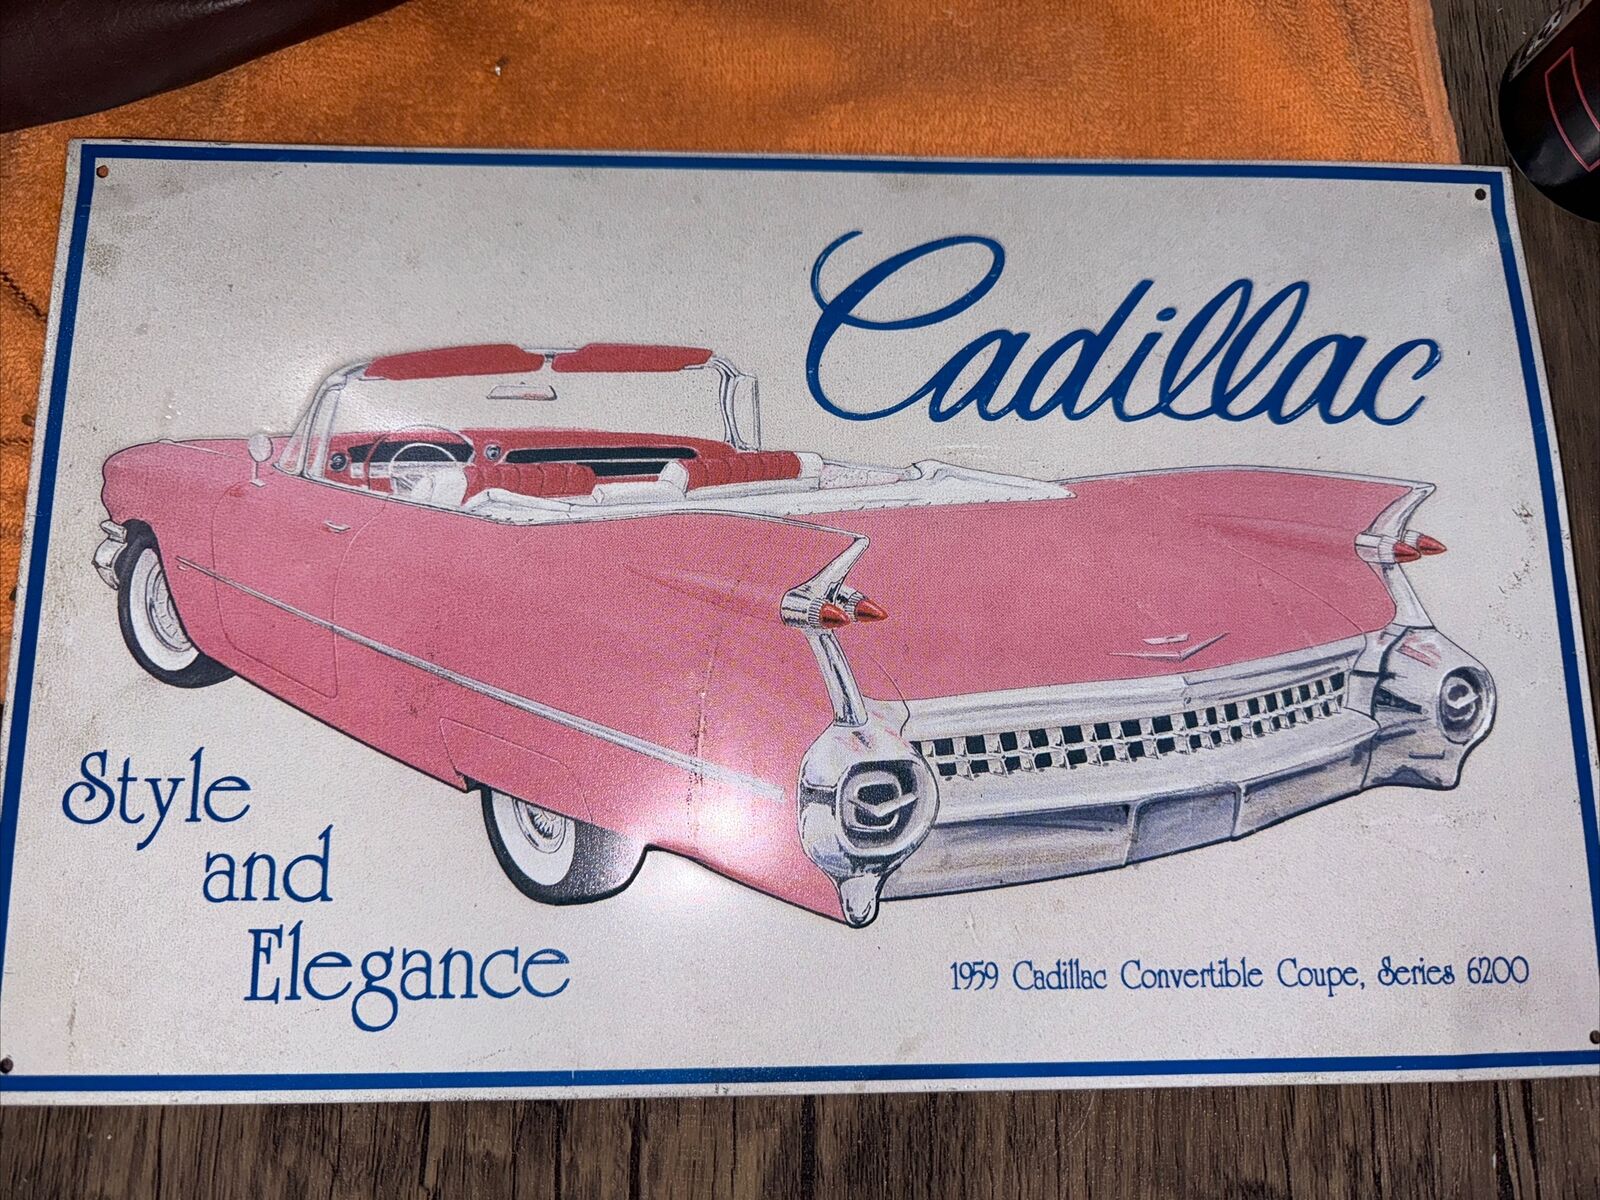 1959 Cadillac Convertible Coupe Series 6200 Tin Sign 15.5 x 9.5 Made in USA